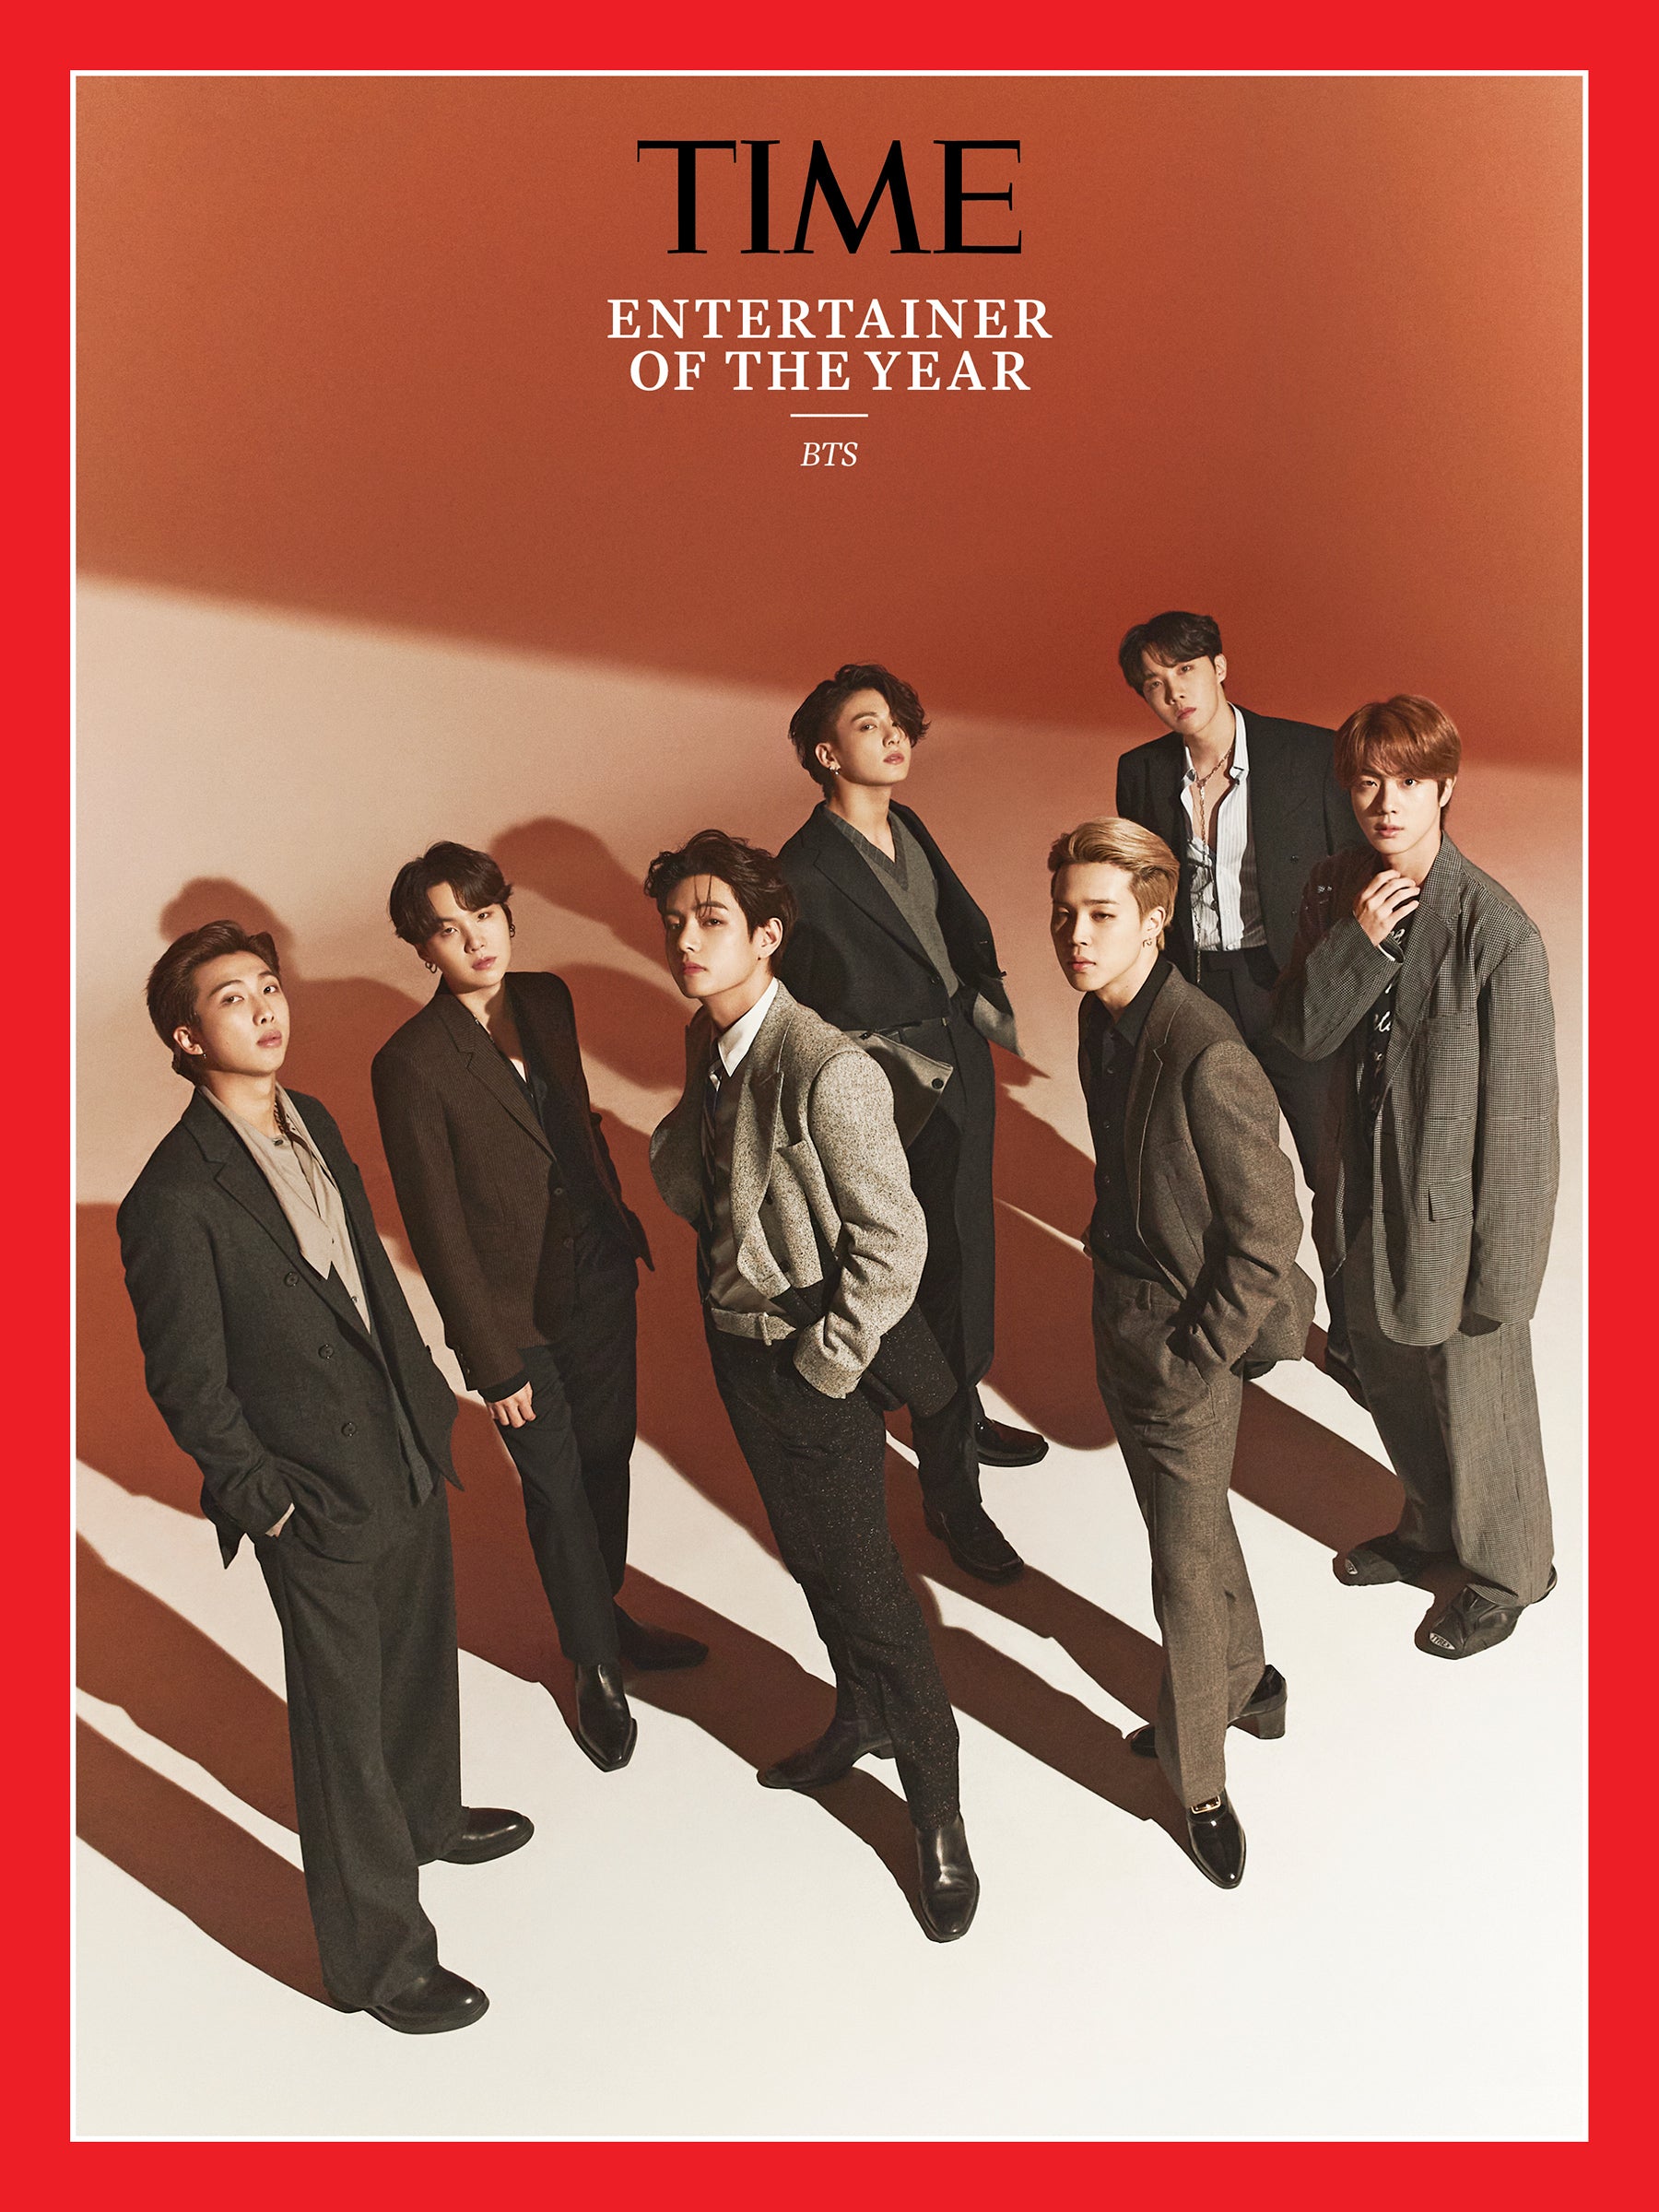 Pre-order the January 2022 Print Issue Featuring BTS